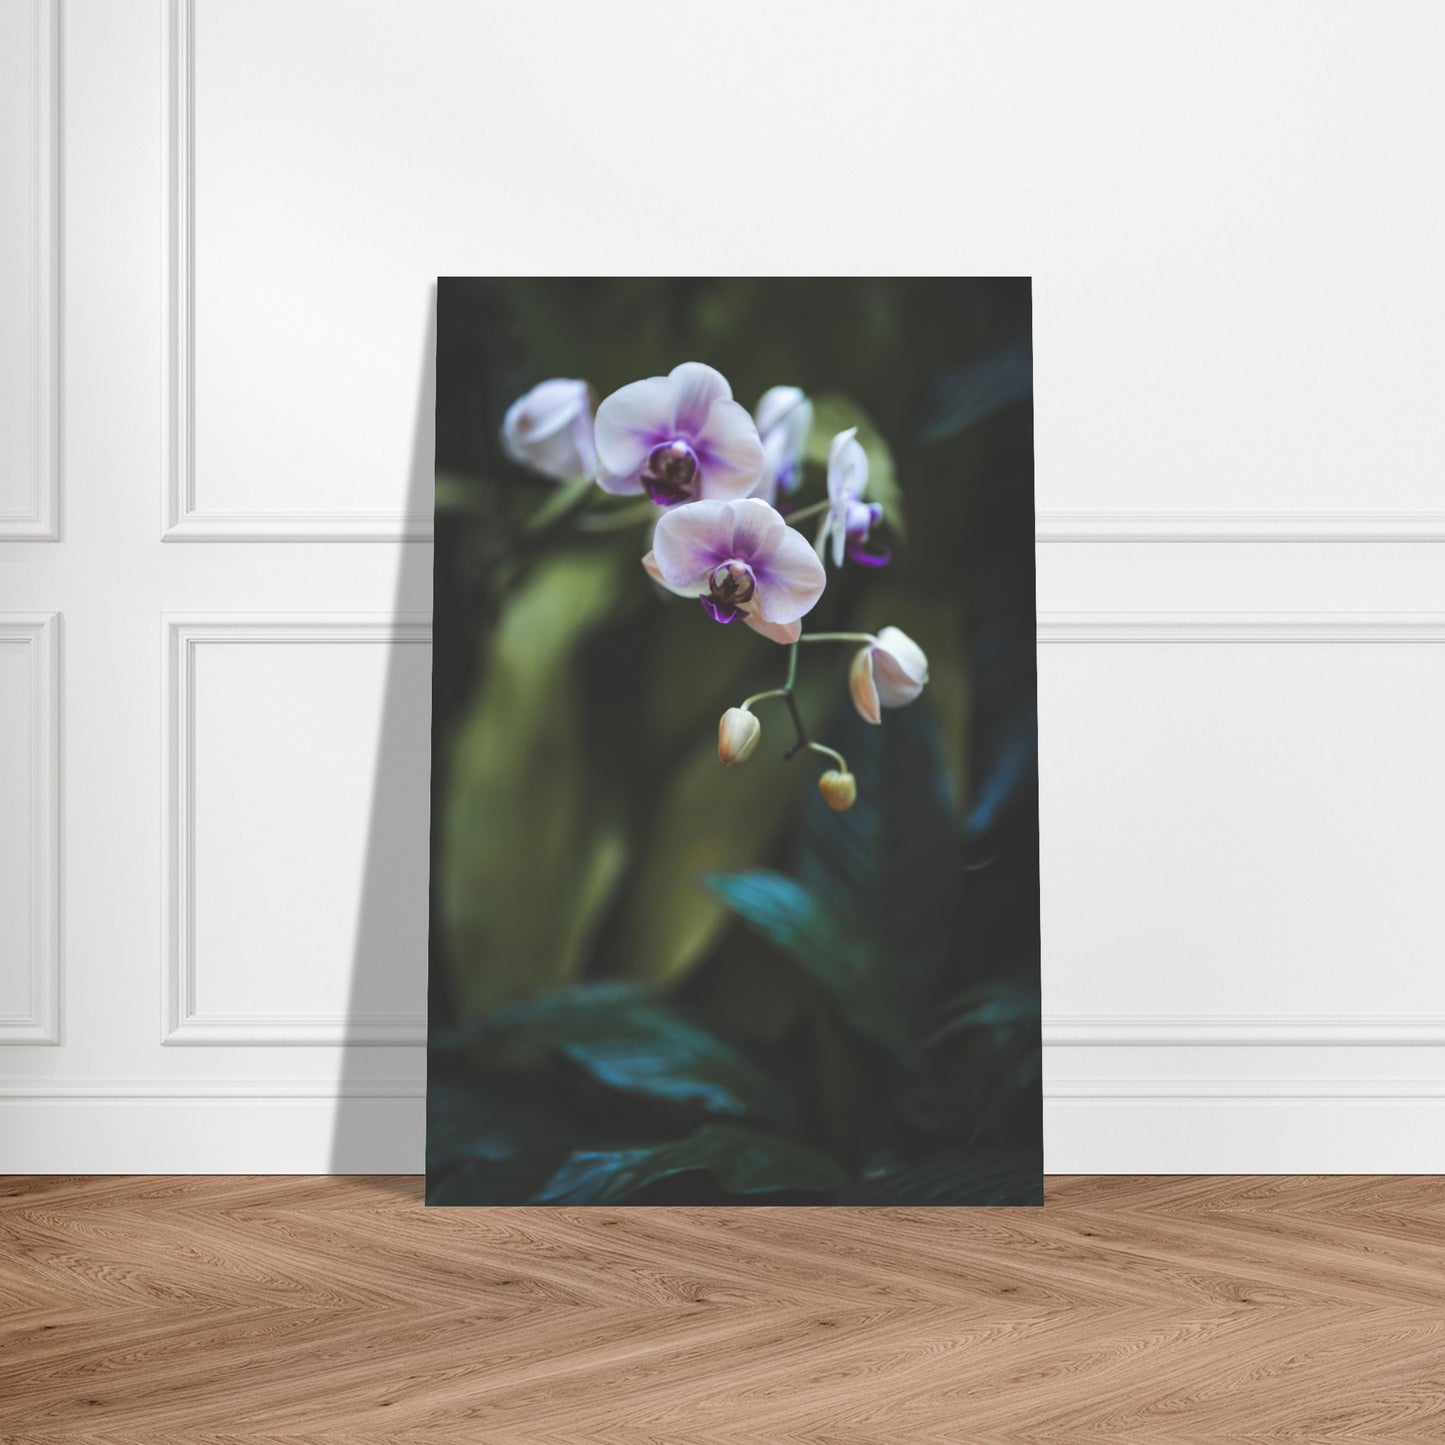 Polynesian Orchid (Collectible Aluminum Print - 8"x12")